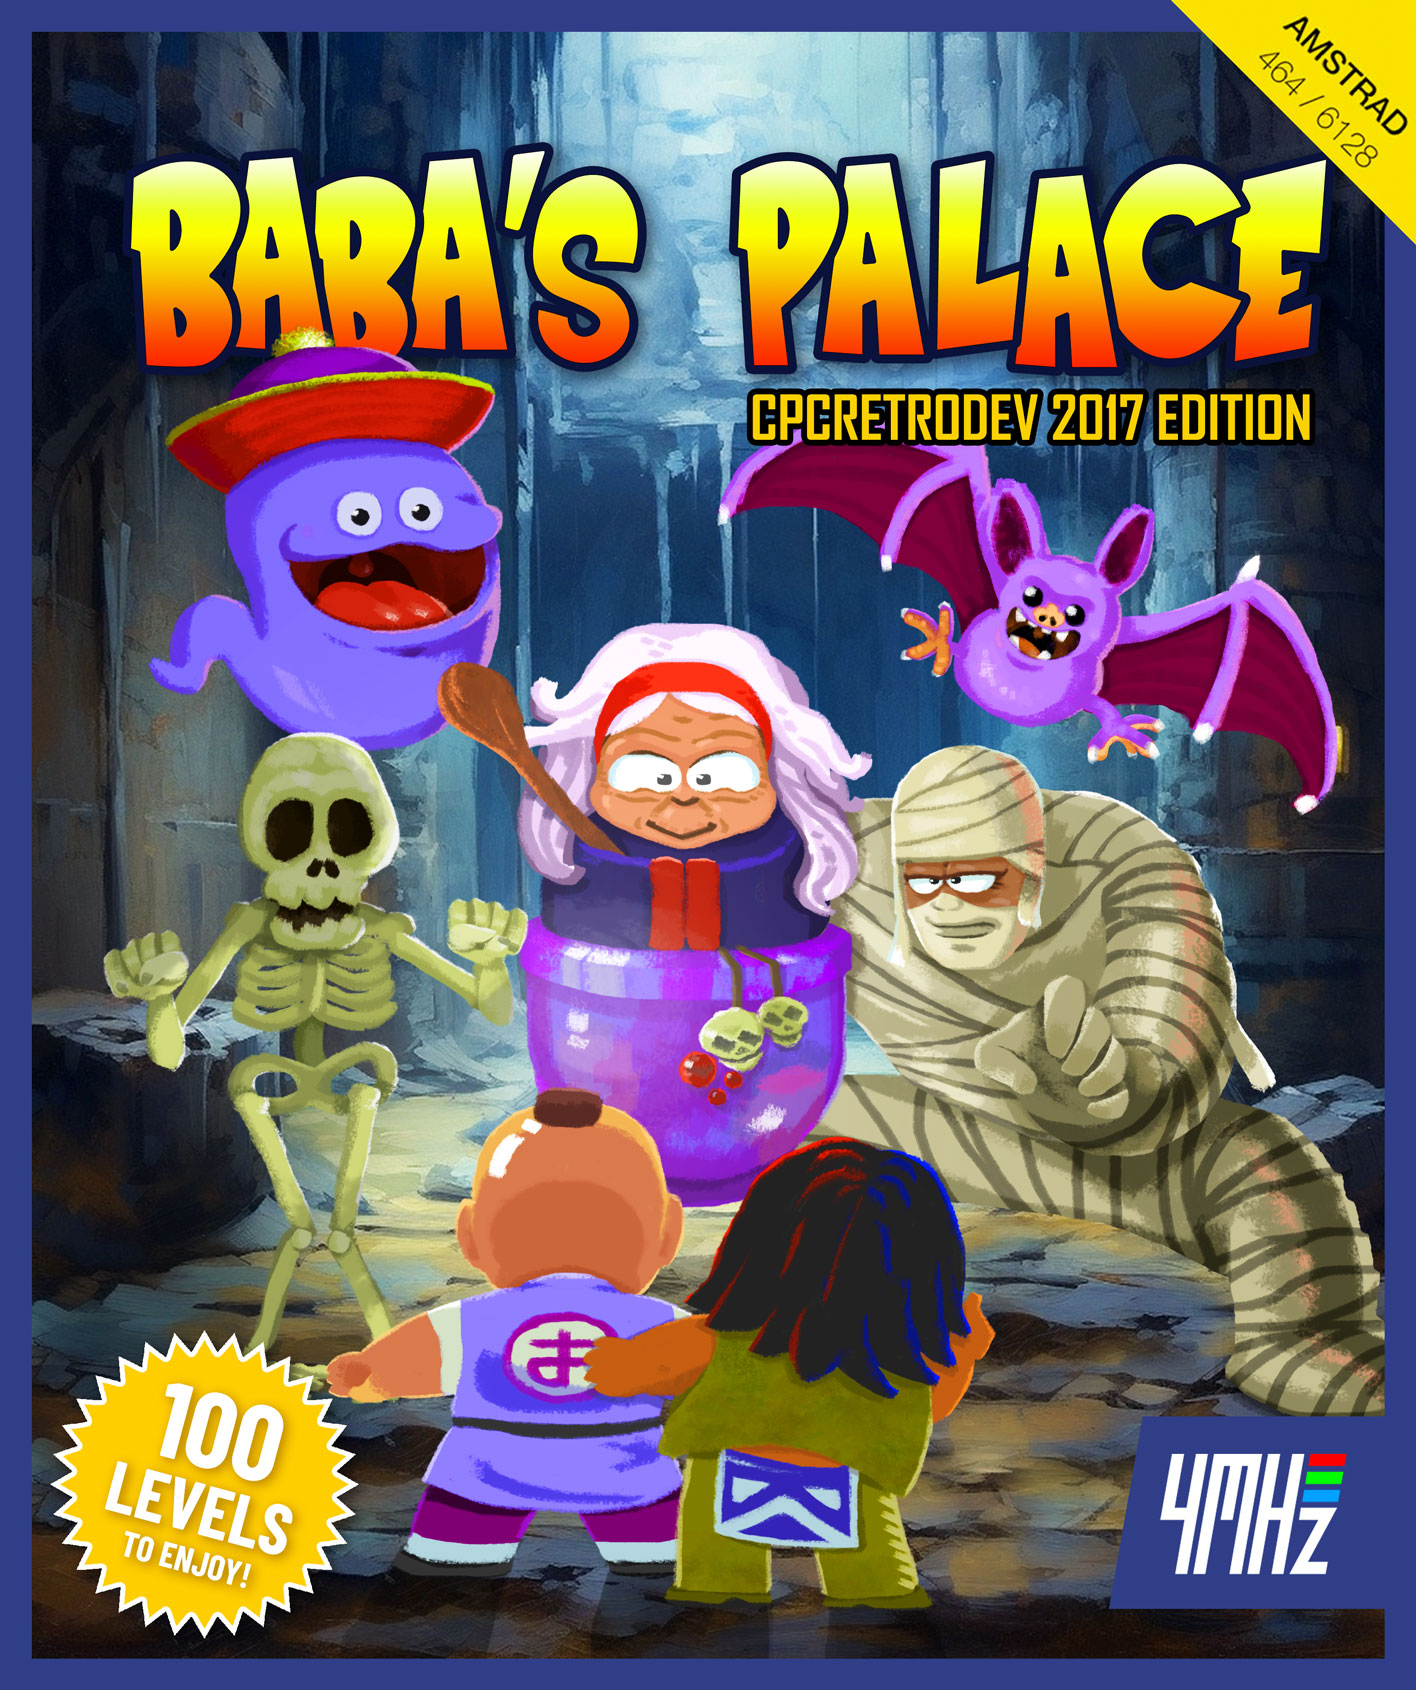 https://www.4mhz.es/wp-content/uploads/2023/06/4mhz-babas-palace-cover.jpg